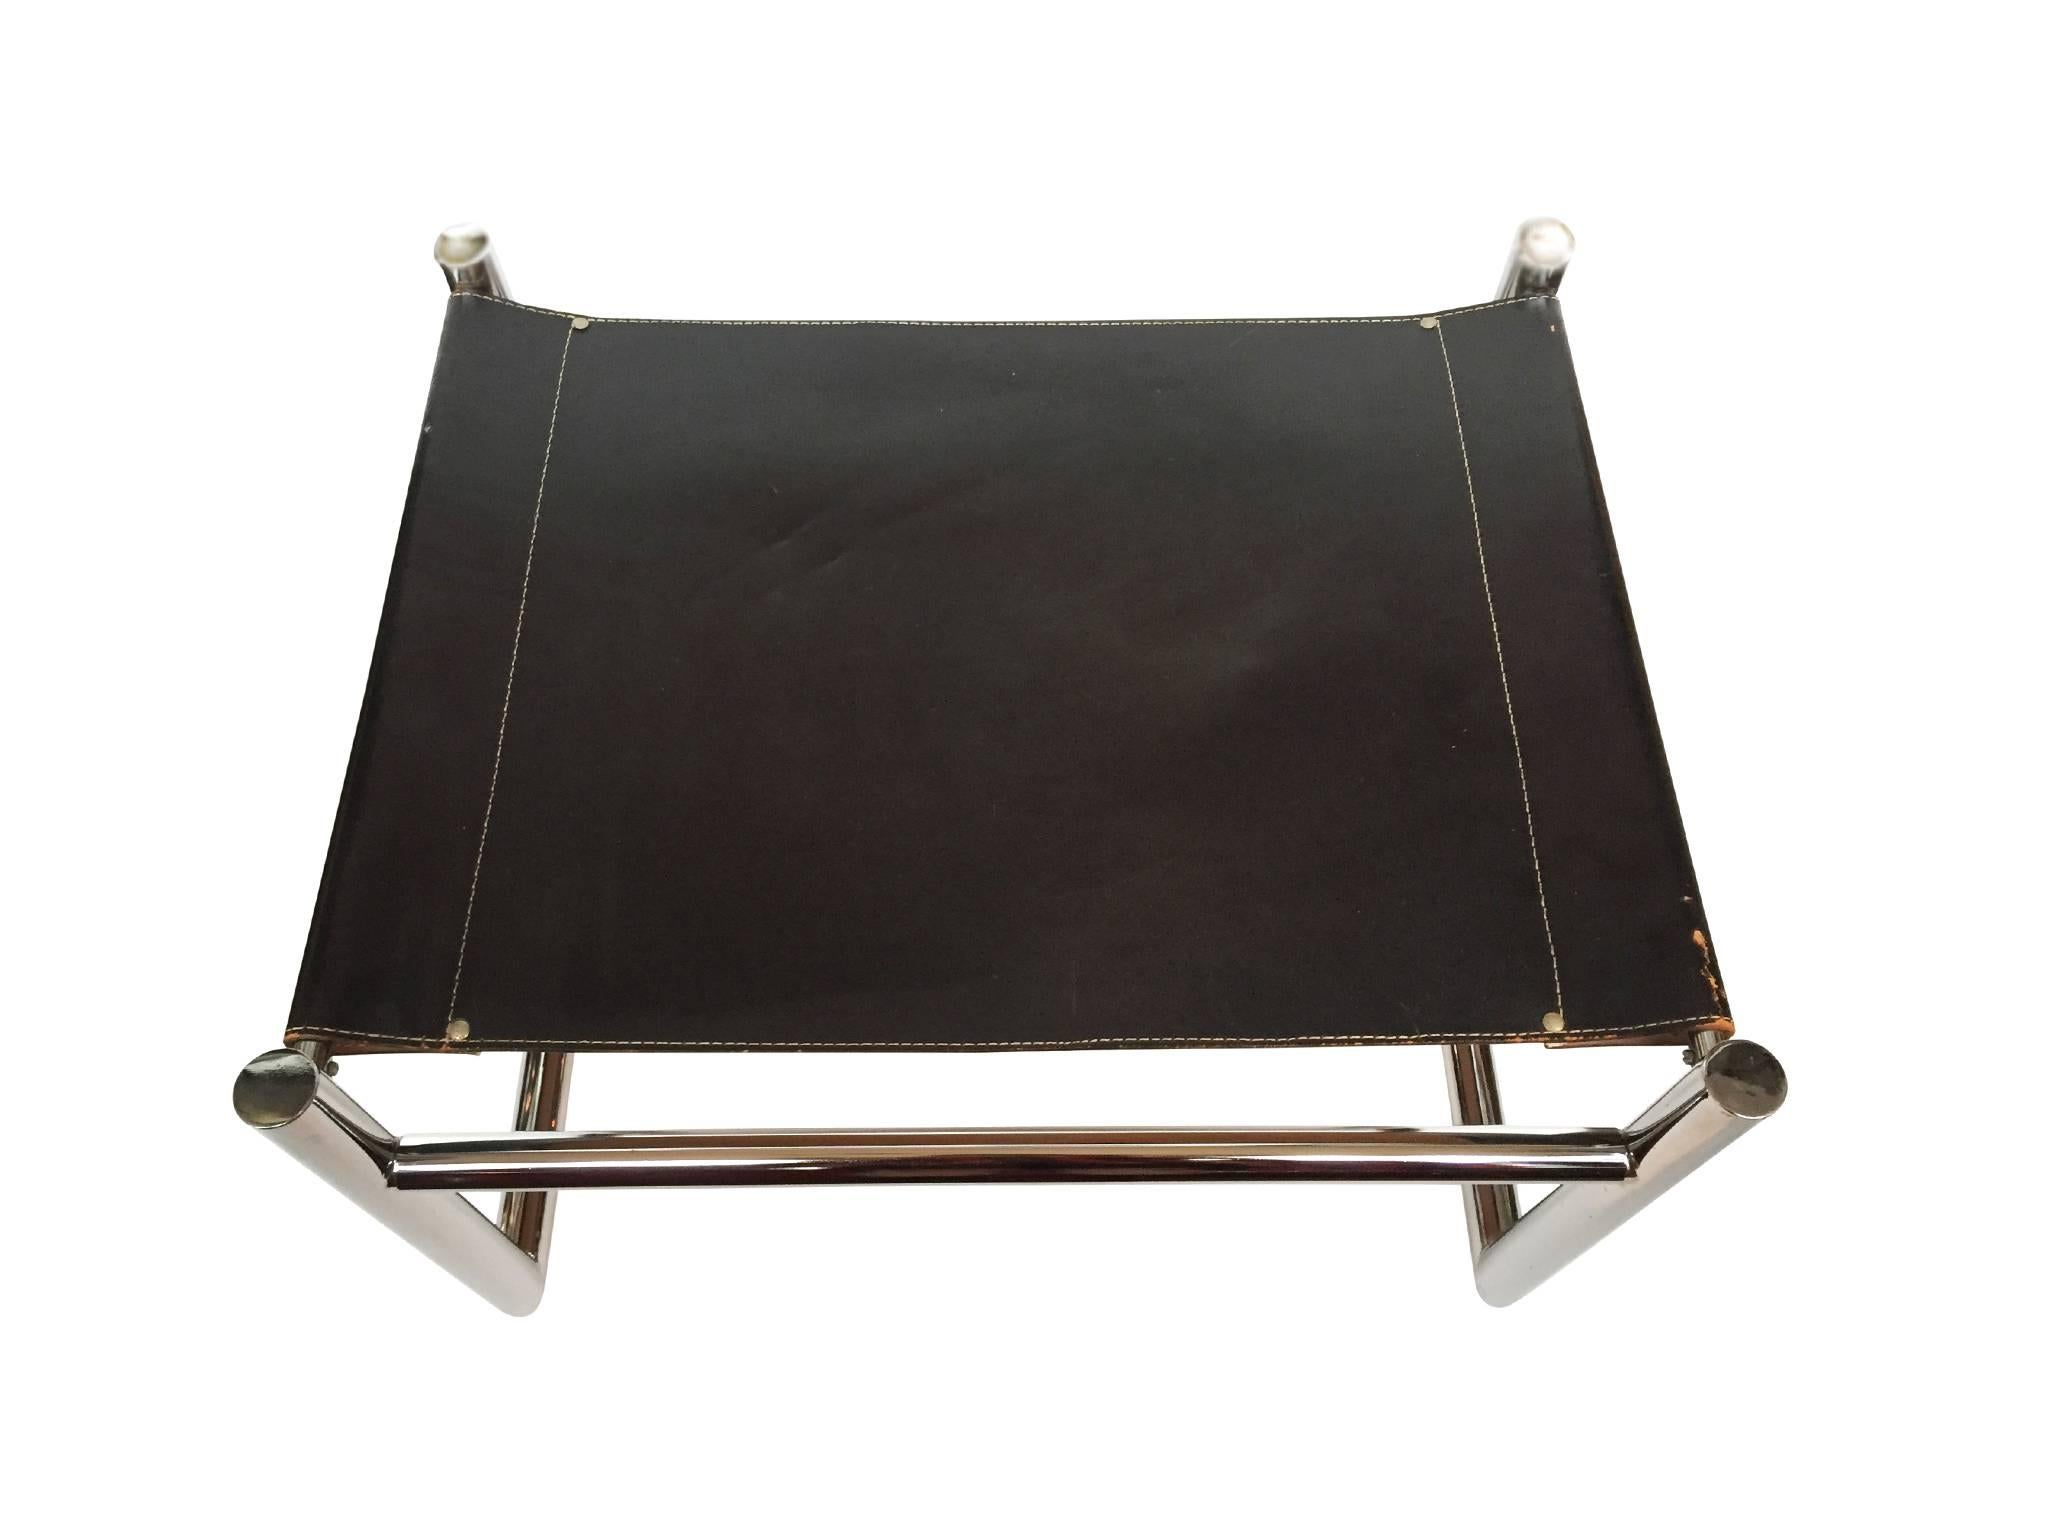 These classic ottomans or benches are comprised of sewn and stretched black leather upholstery and a chromed, tubular steel frame. They are in the minimalist tradition of Bauhaus design: clean lines and planes and austere use of materials. This